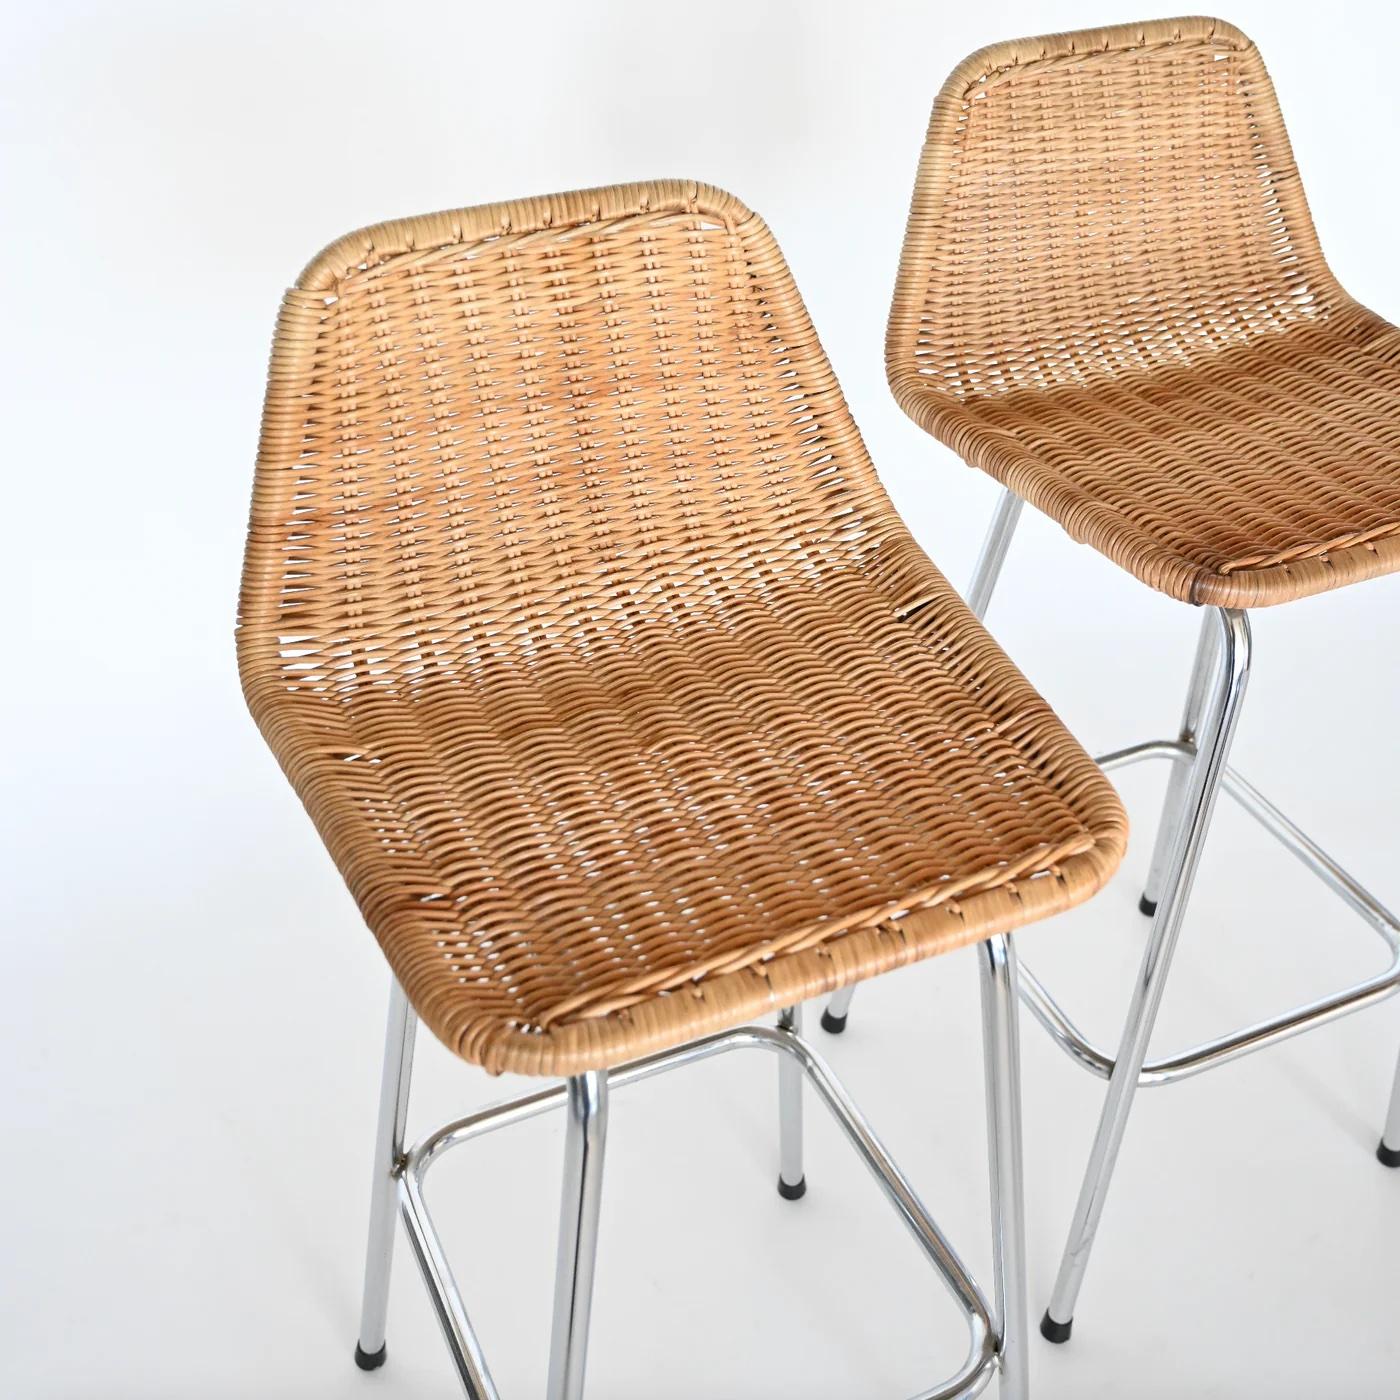 Pair of rattan and chrome counterstools by Dirk van Sliedregt for Rohe Noordwold In Good Condition For Sale In Venice, CA